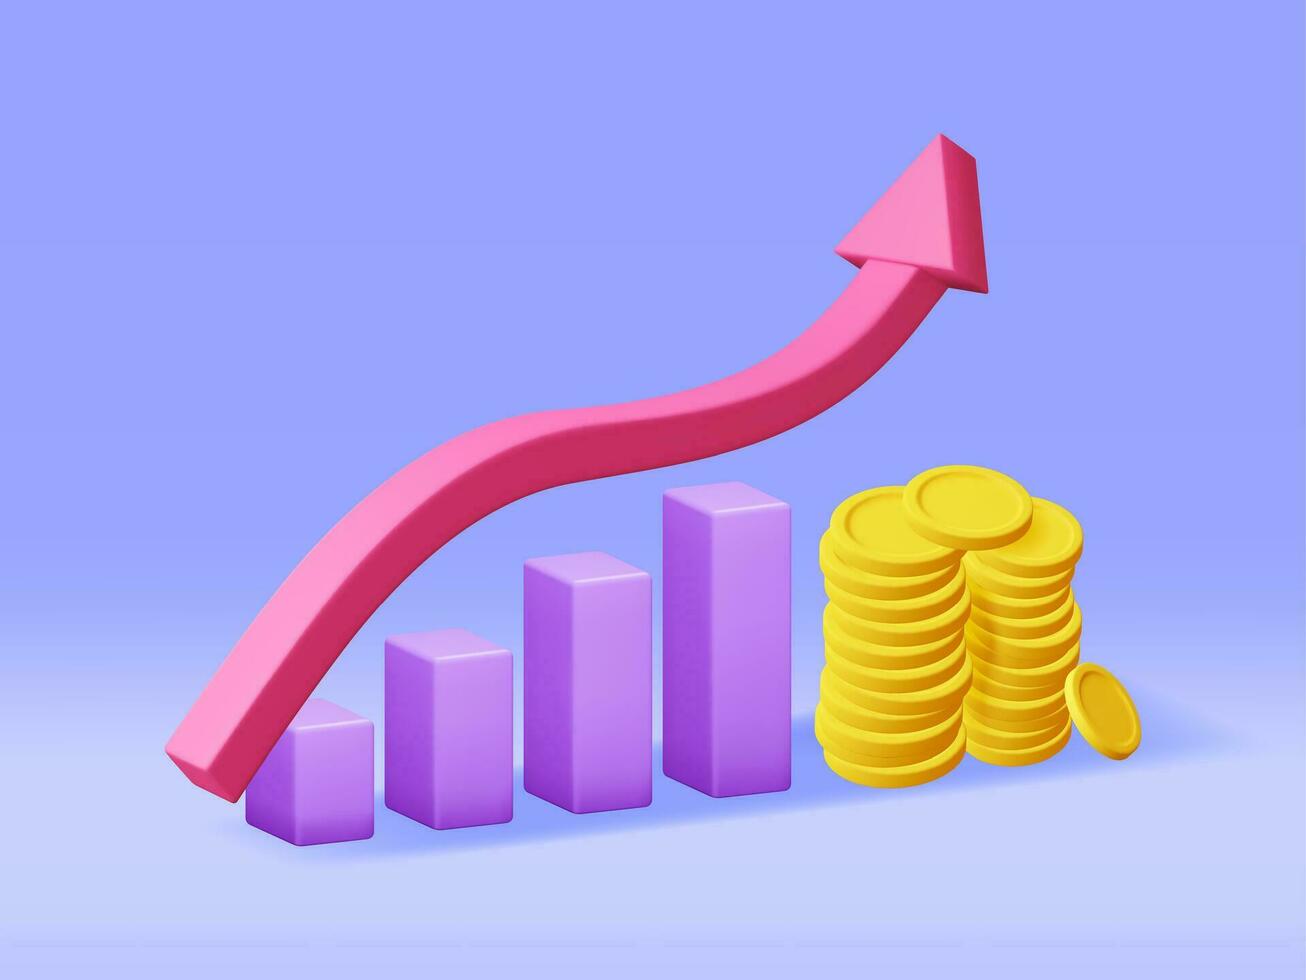 3D Growth Stock Chart Arrow with Golden Coins. Render Stock Arrow with Money Shows Growth or Success. Financial Item, Business Investment Financial Market Trade. Money and Banking. Vector Illustration